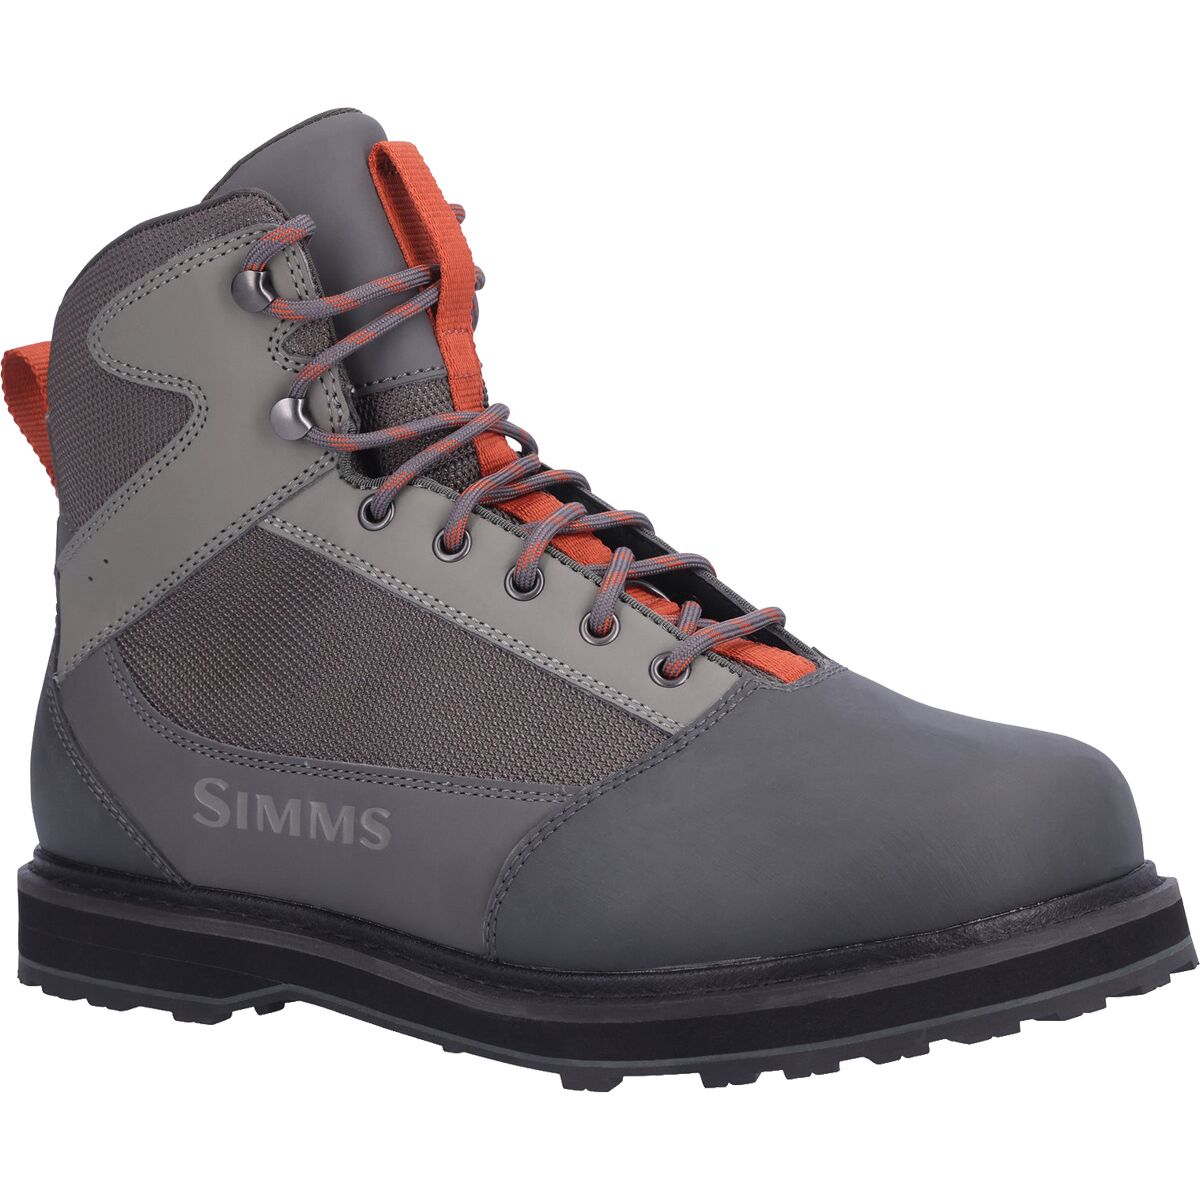 Simms Tributary Wading Boot - Men's